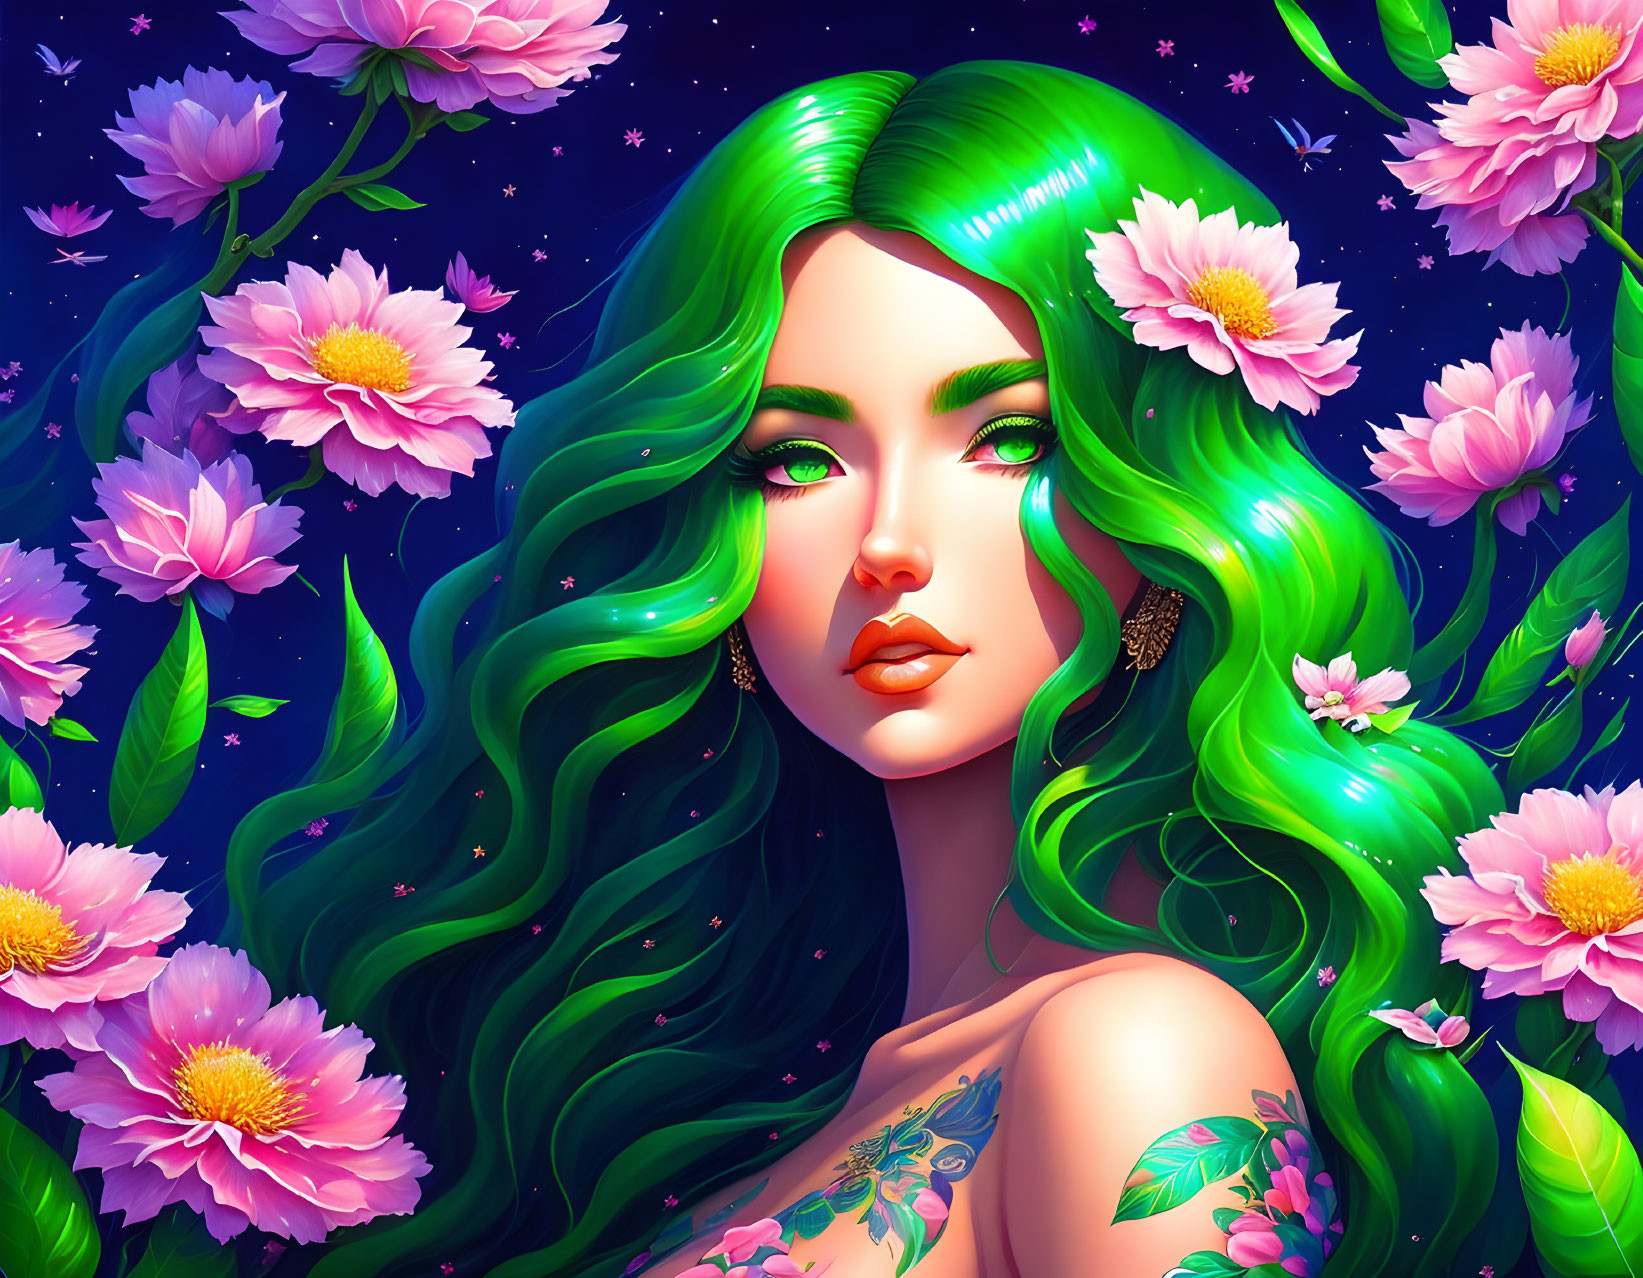 Colorful illustration: Woman with emerald green hair and tattoos, pink flowers on dark blue background